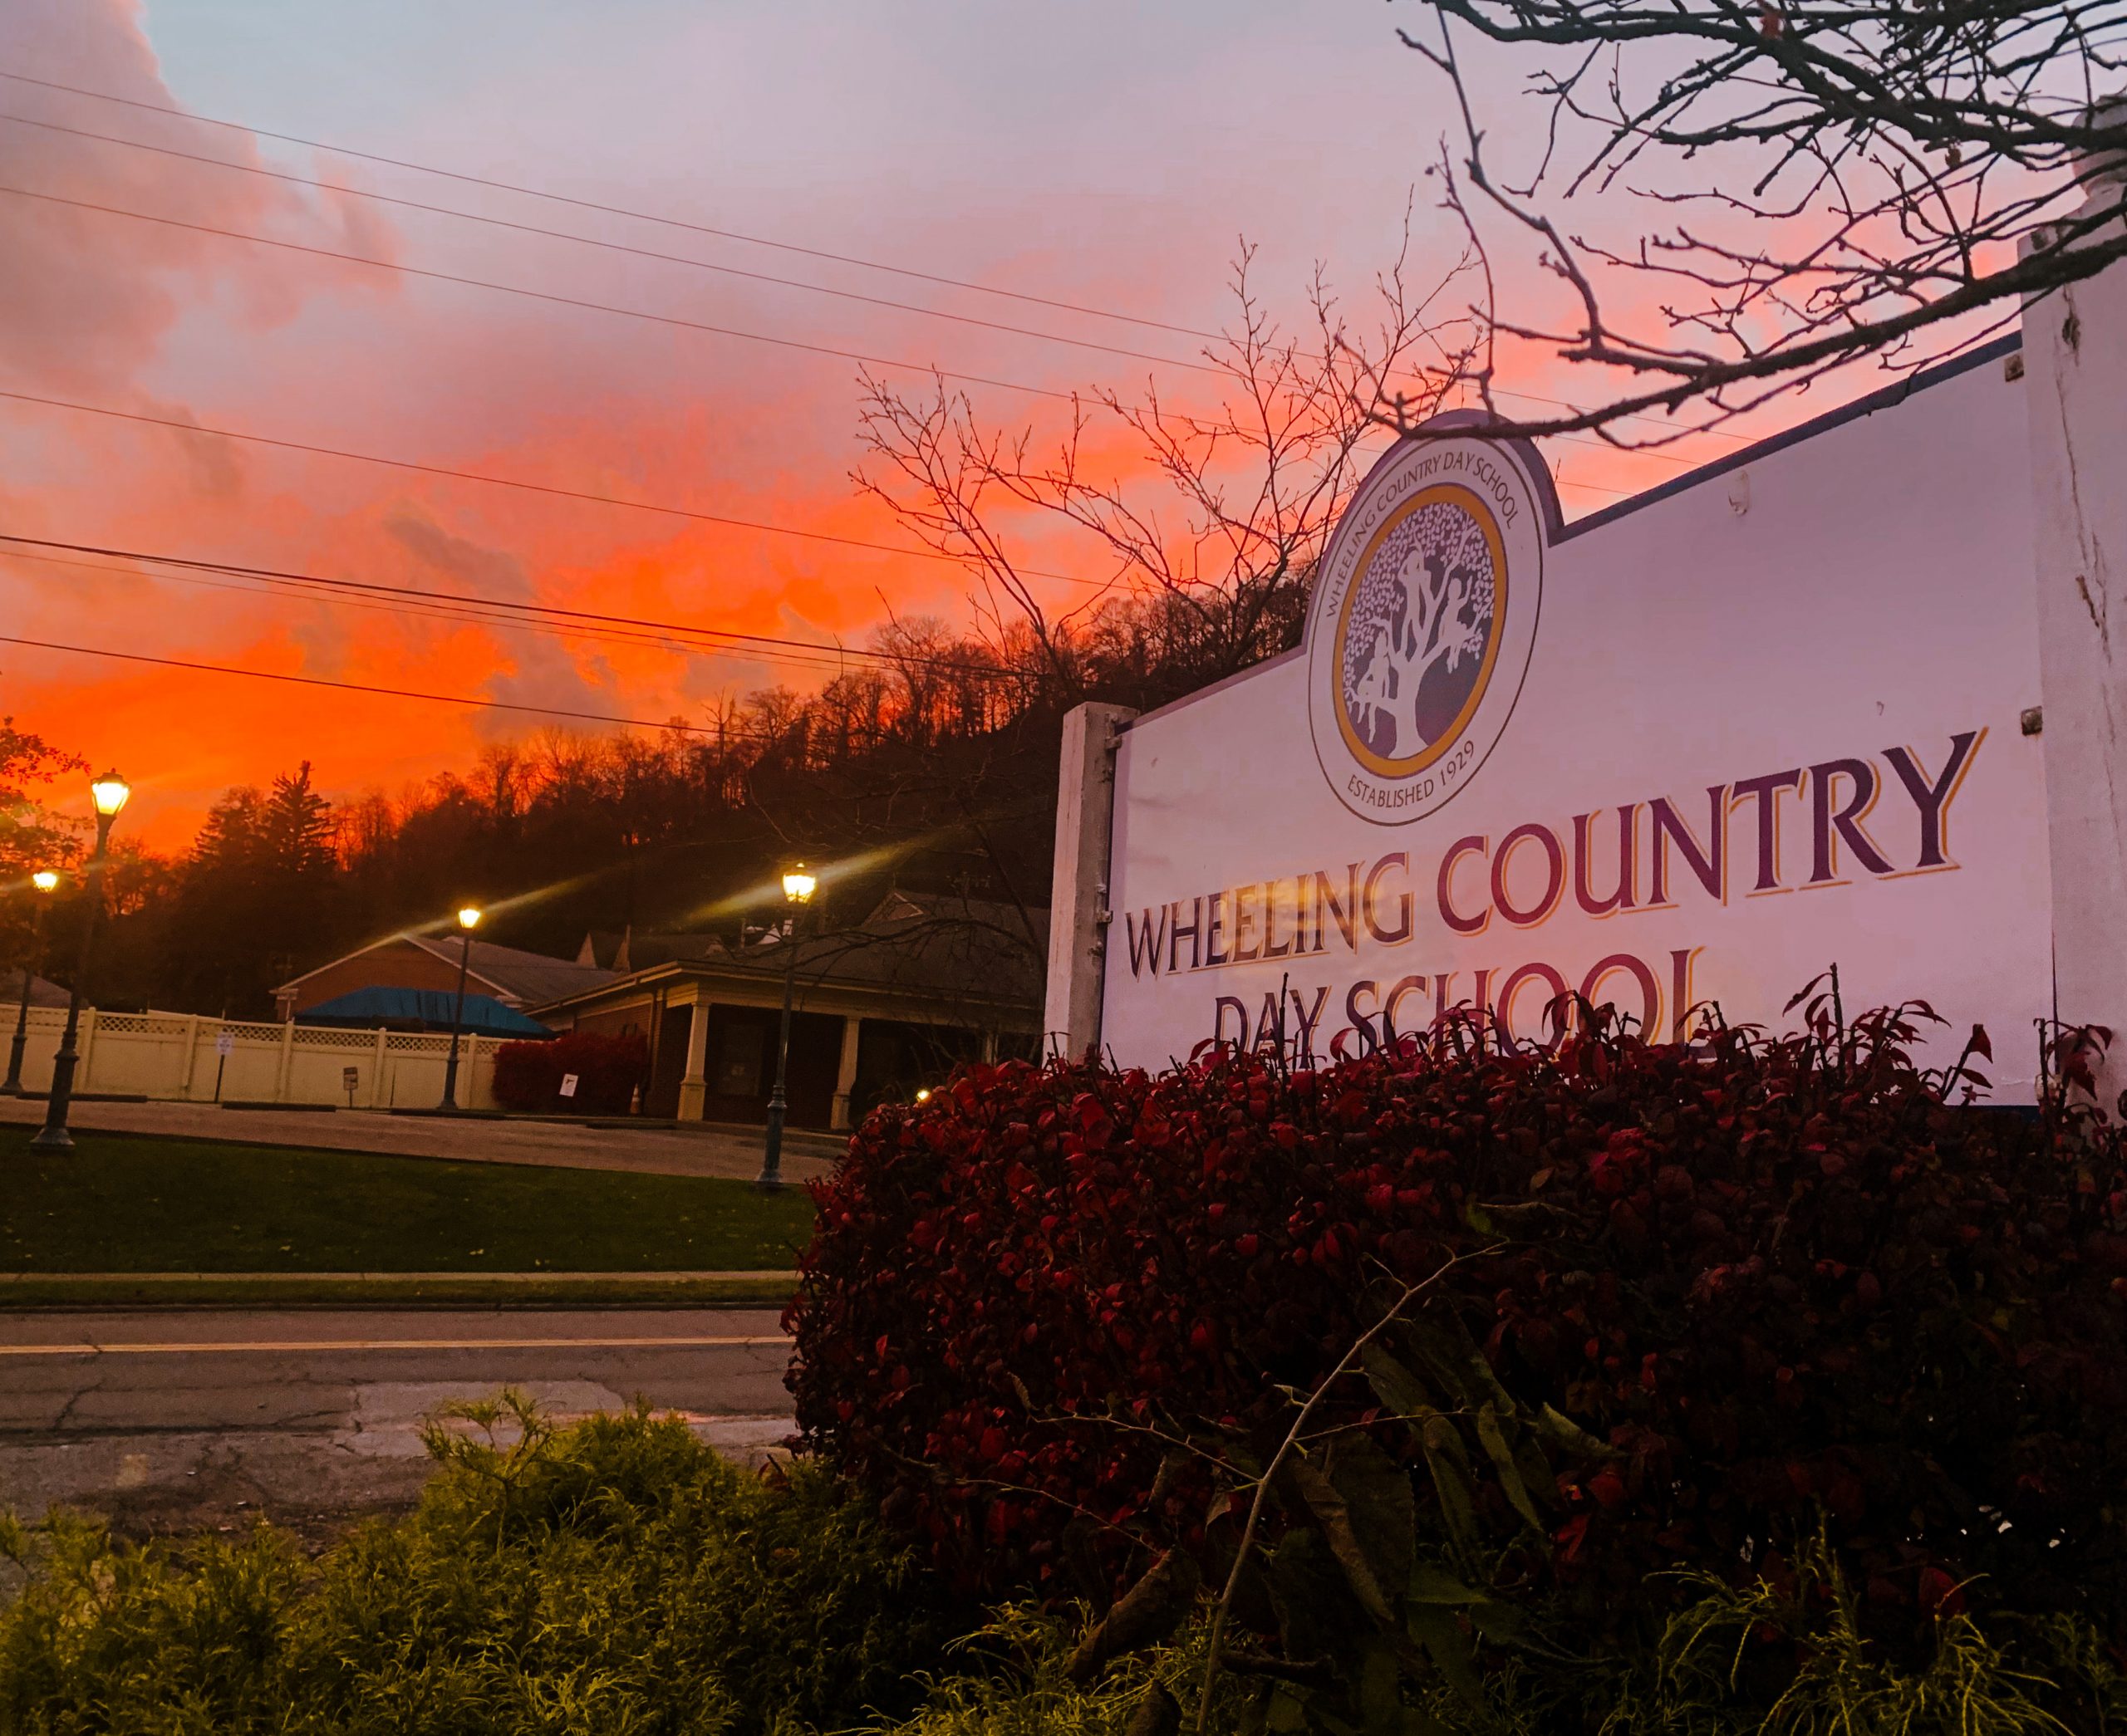 Summer sunset behind the WCDS main campus sign in Wheeling, West Virginia.